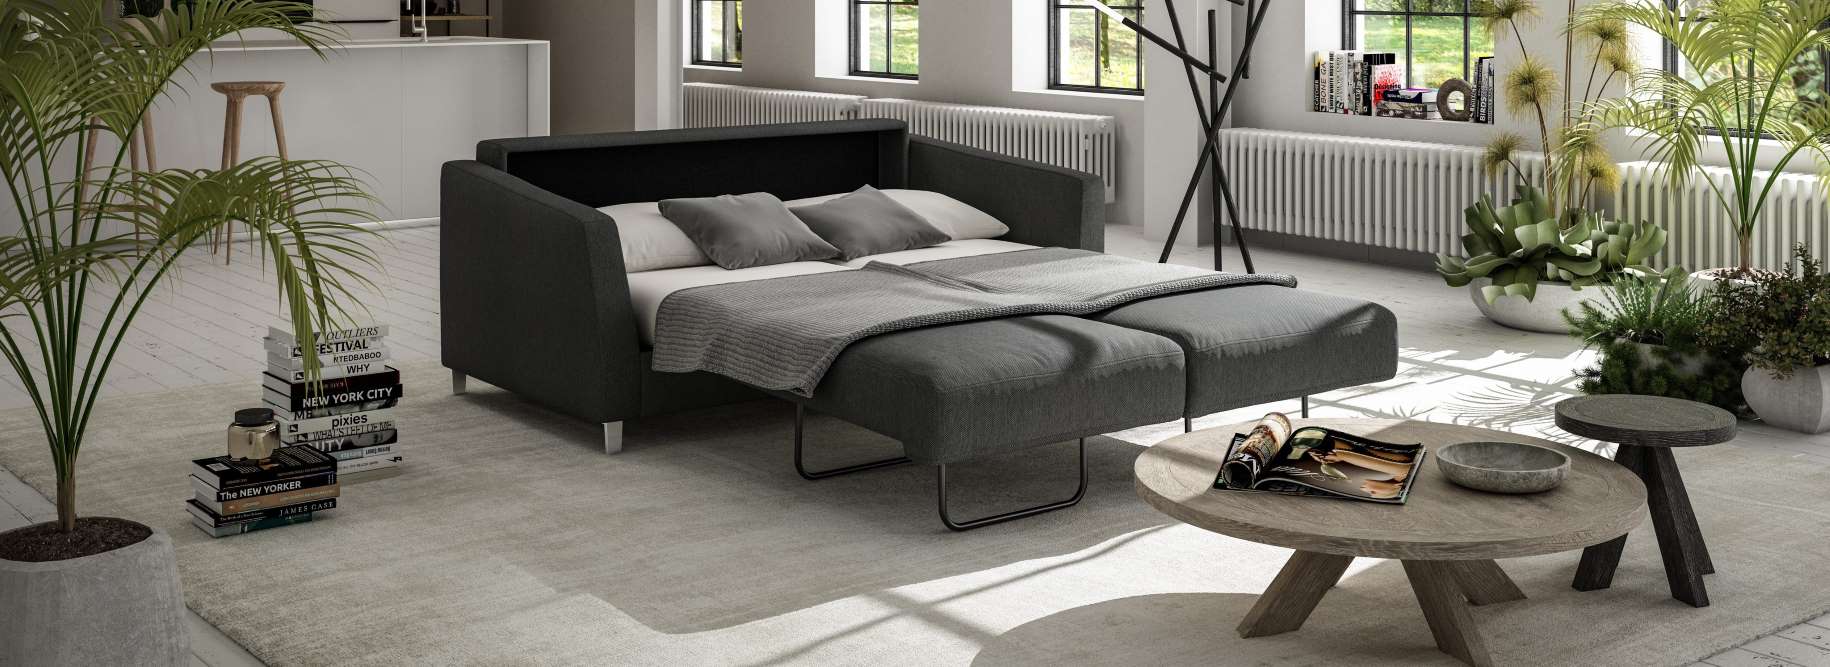 Luonto Monika sofa sleeper in king, queen, full, or cot size